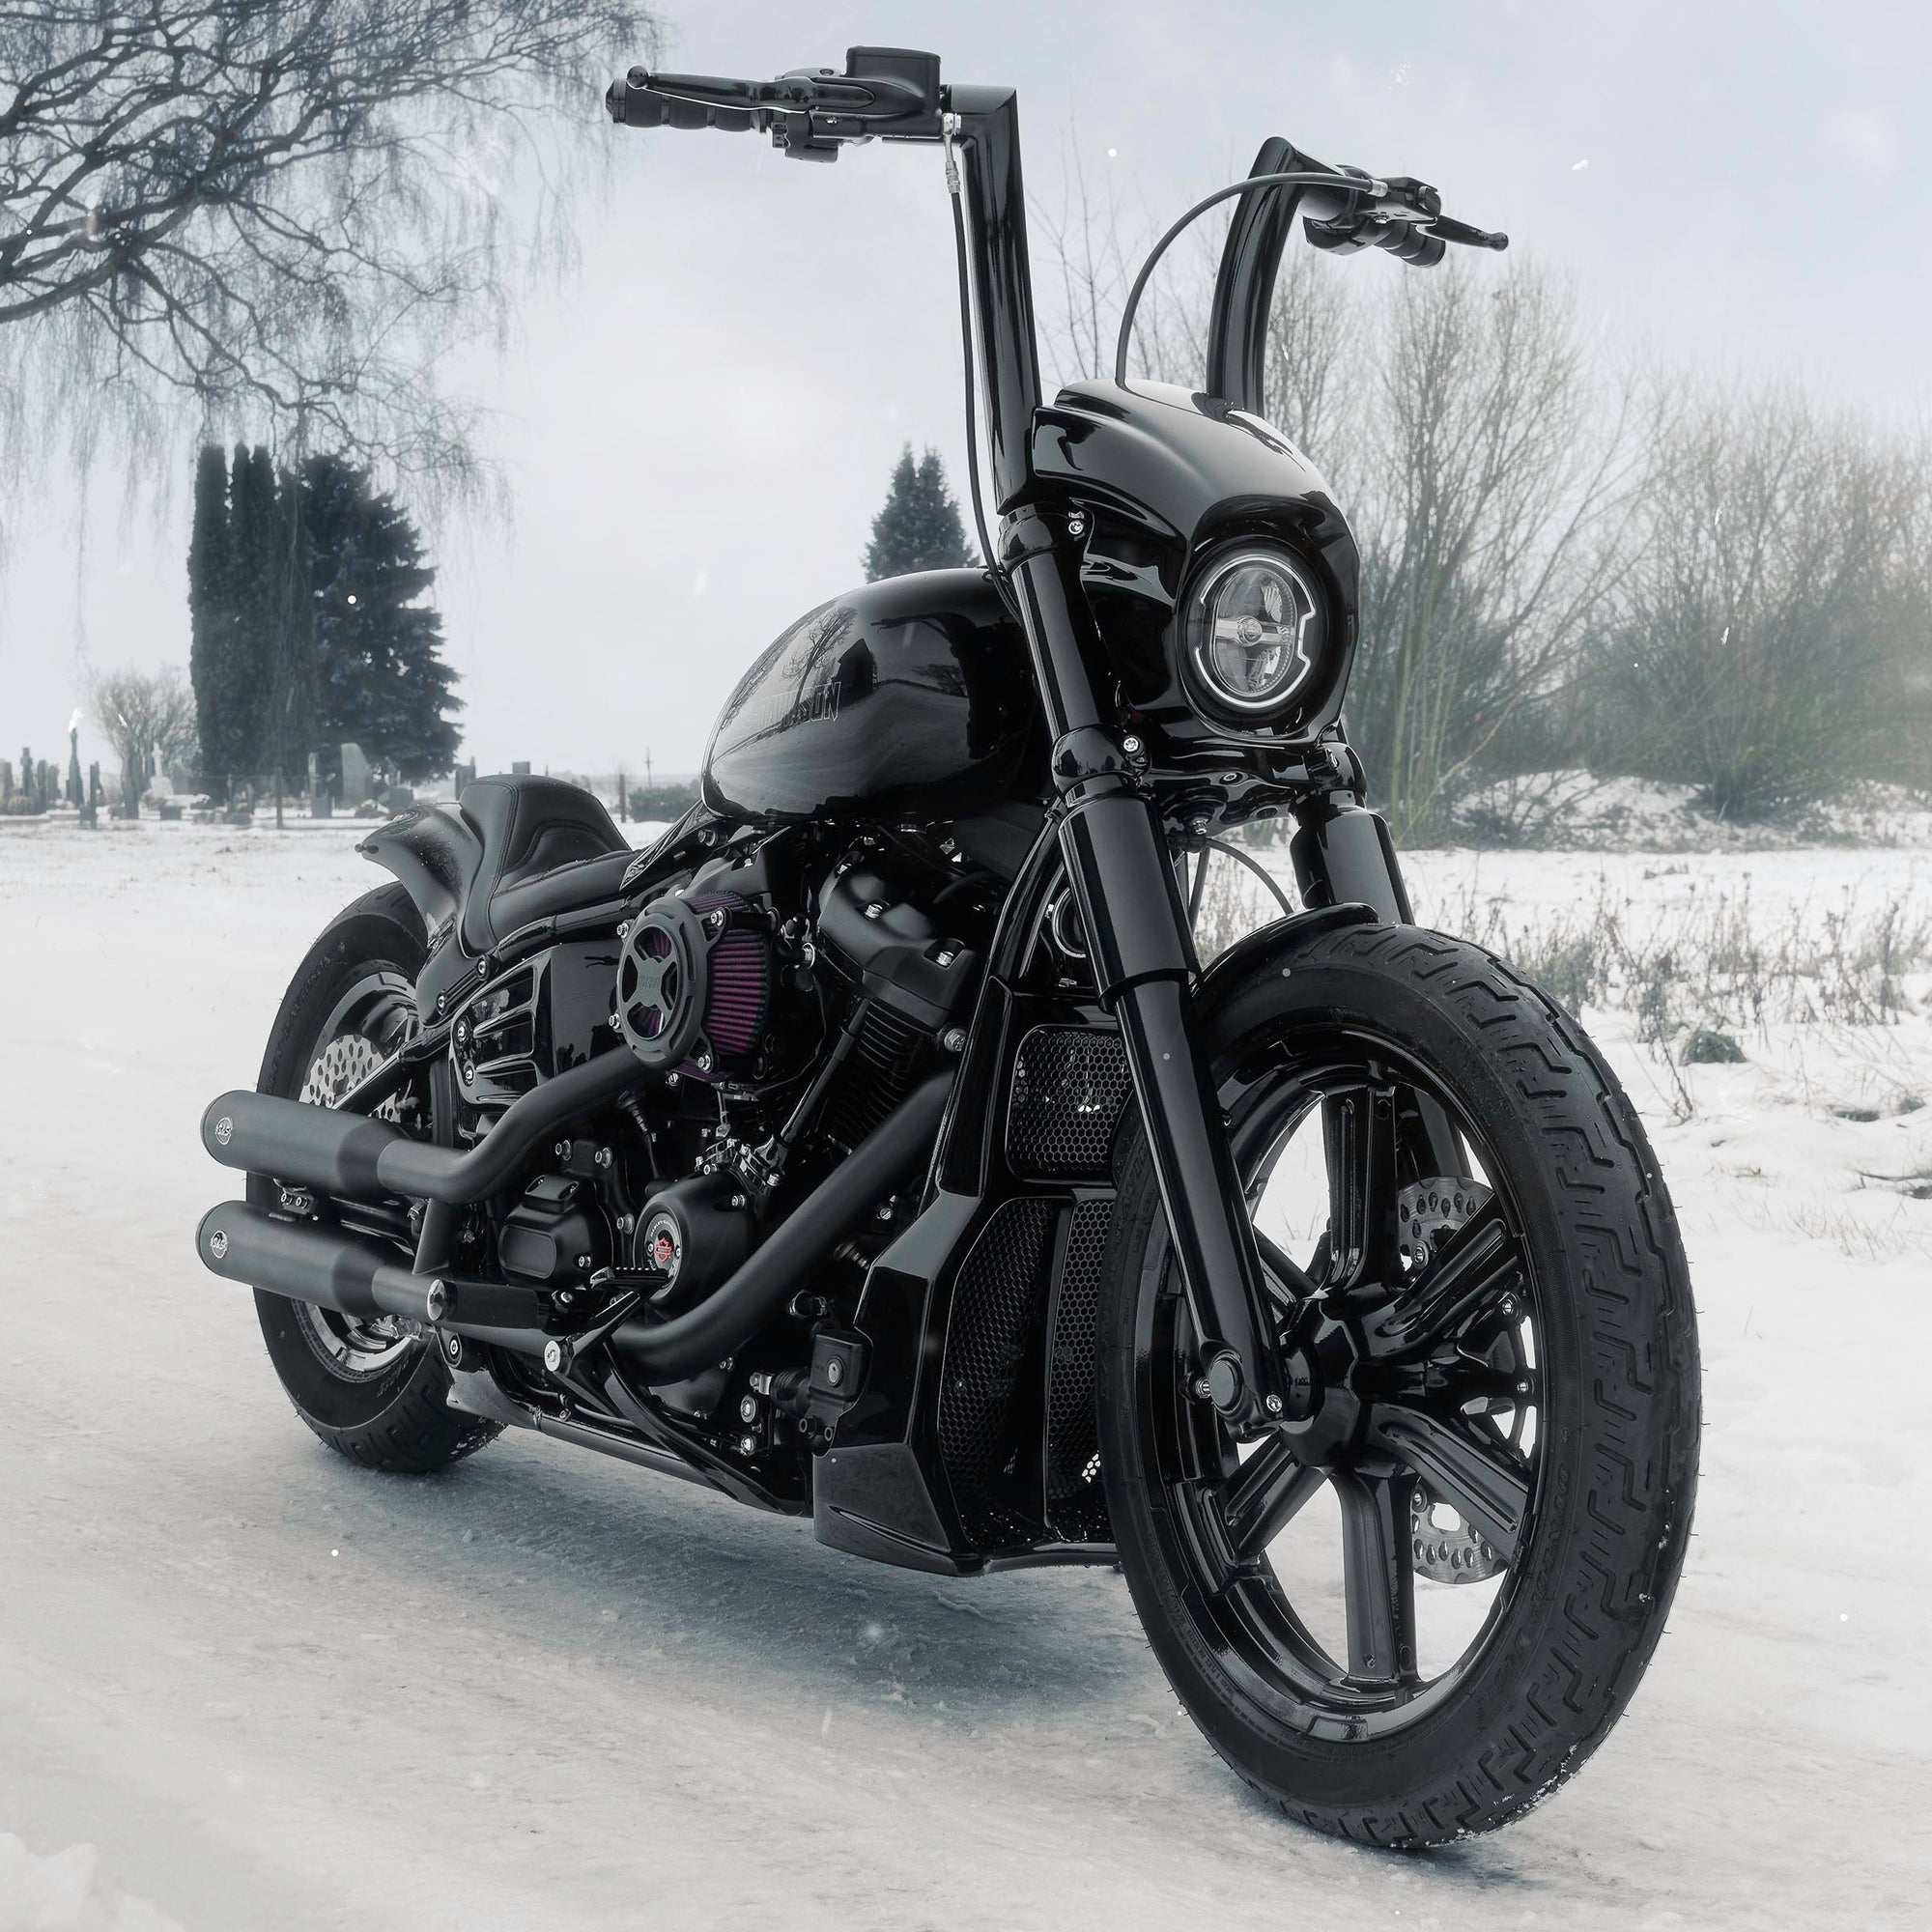 Harley Davidson motorcycle with Killer Custom parts from the front outside on a snowy day with some trees in the background